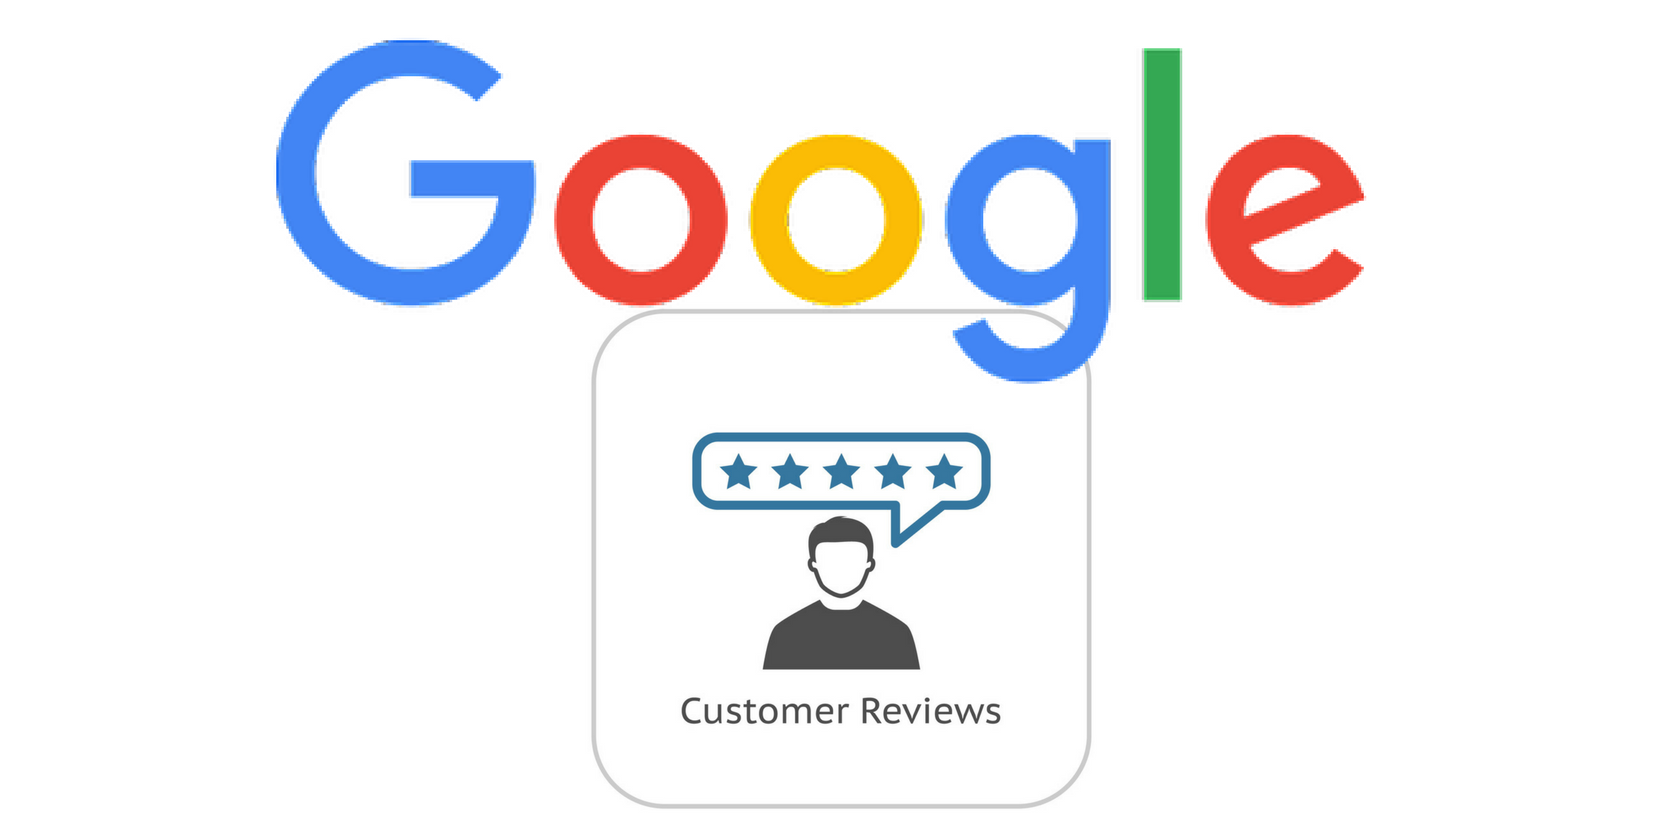 who can see my Google reviews